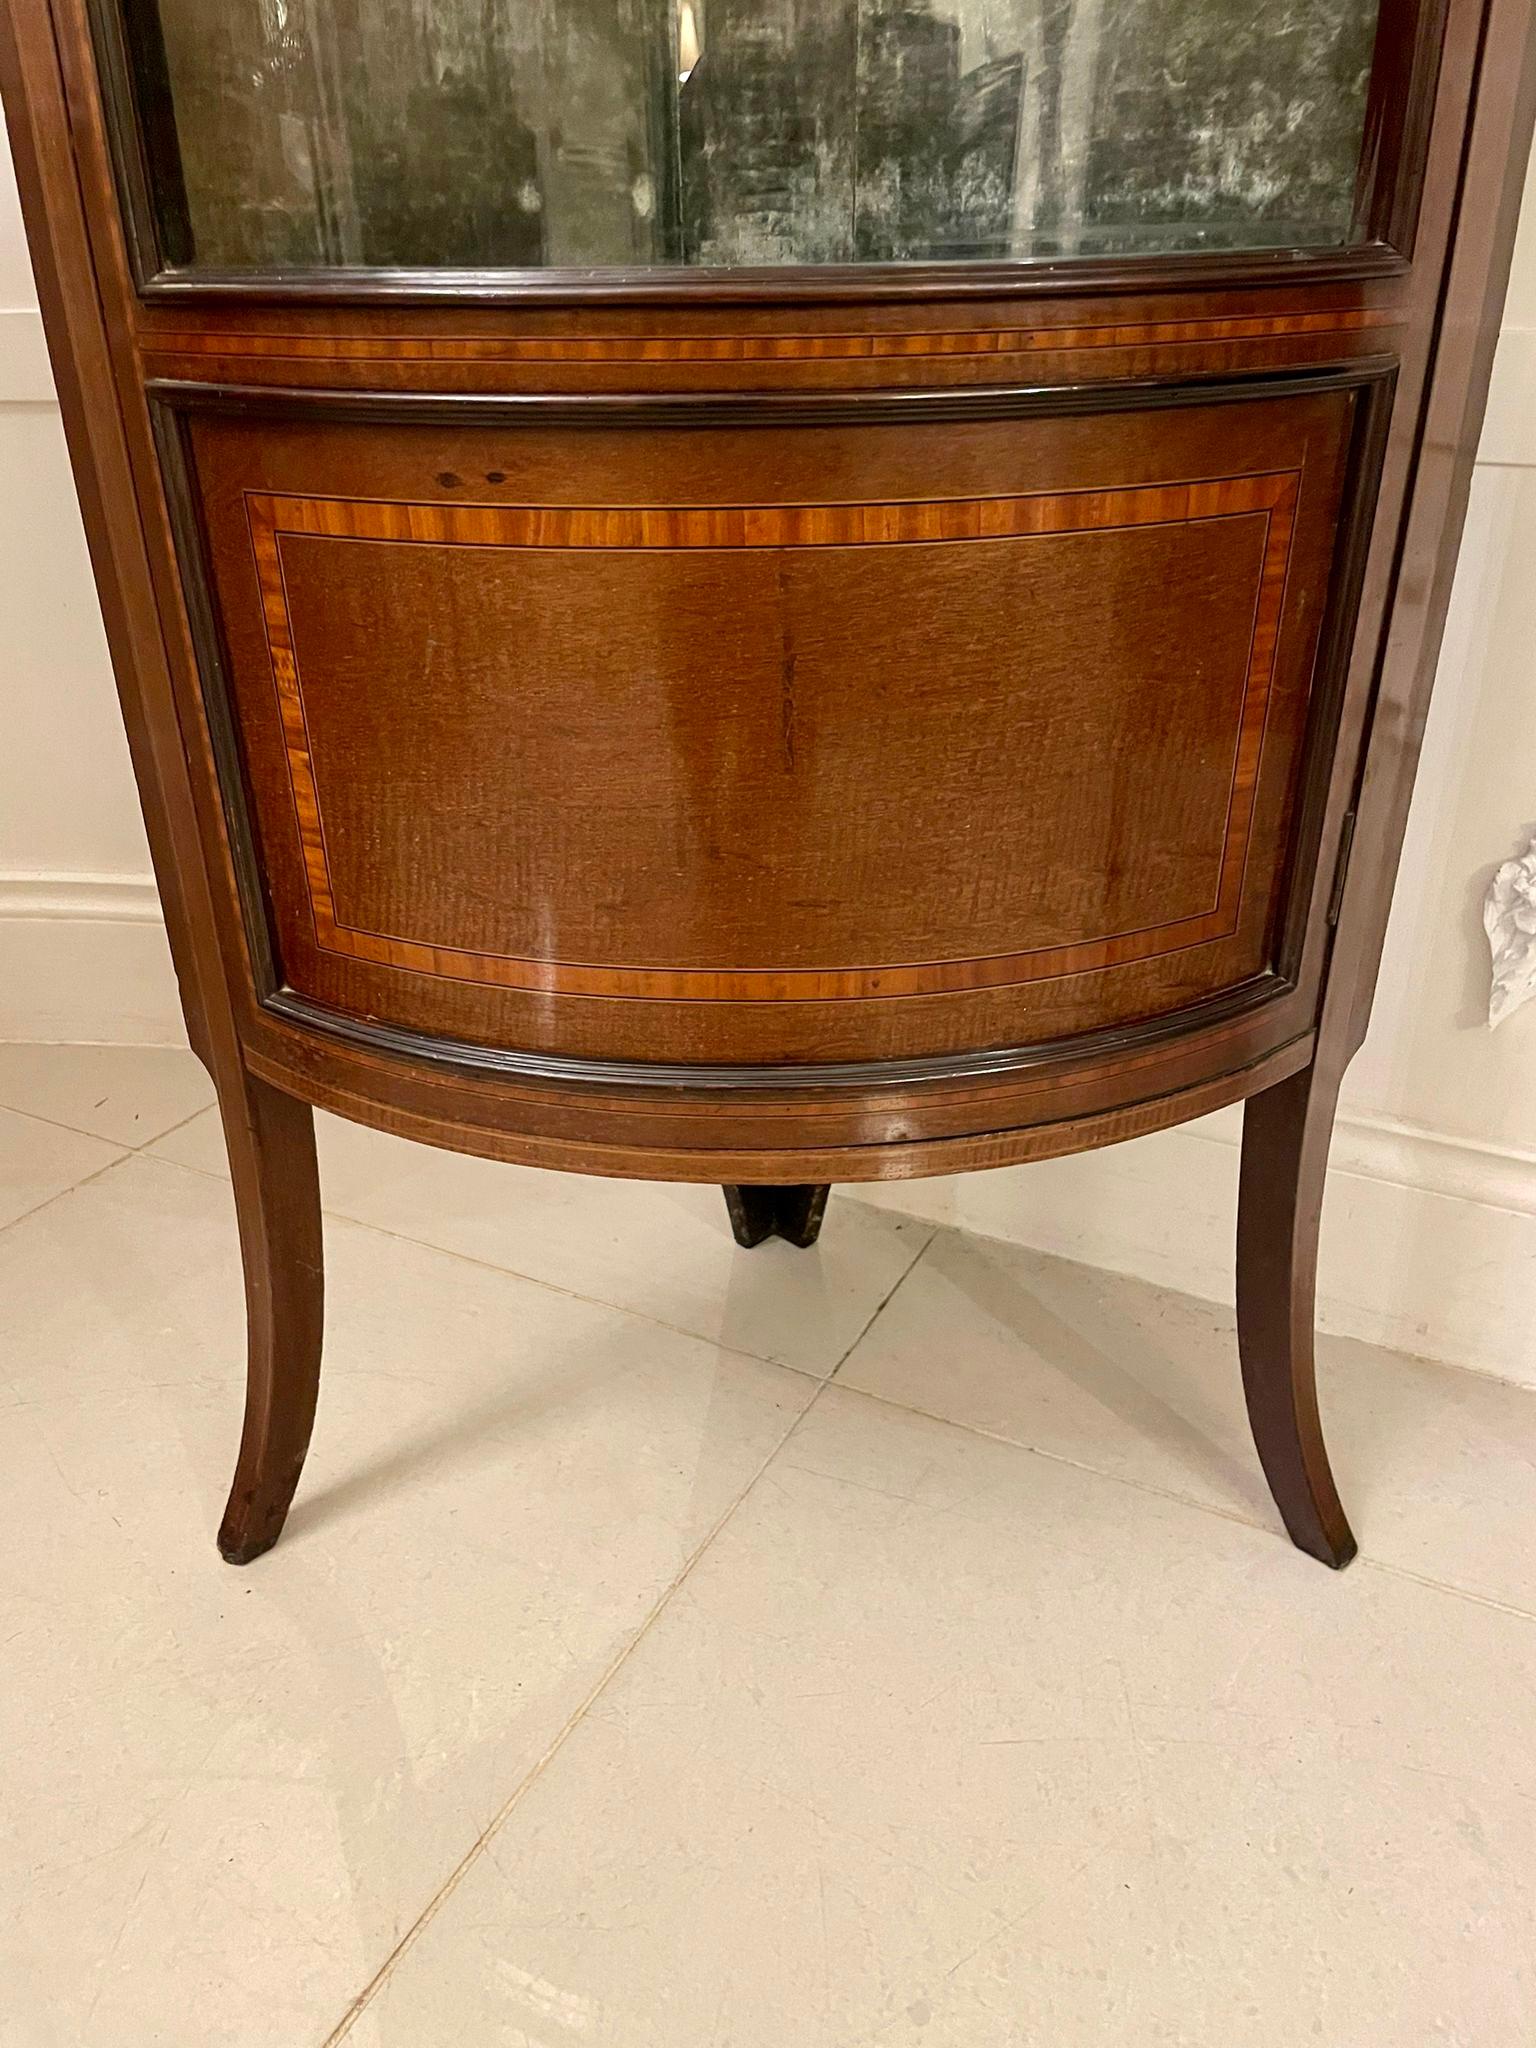 Antique Edwardian Quality Mahogany Inlaid Bow Fronted Corner Display Cabinet 4